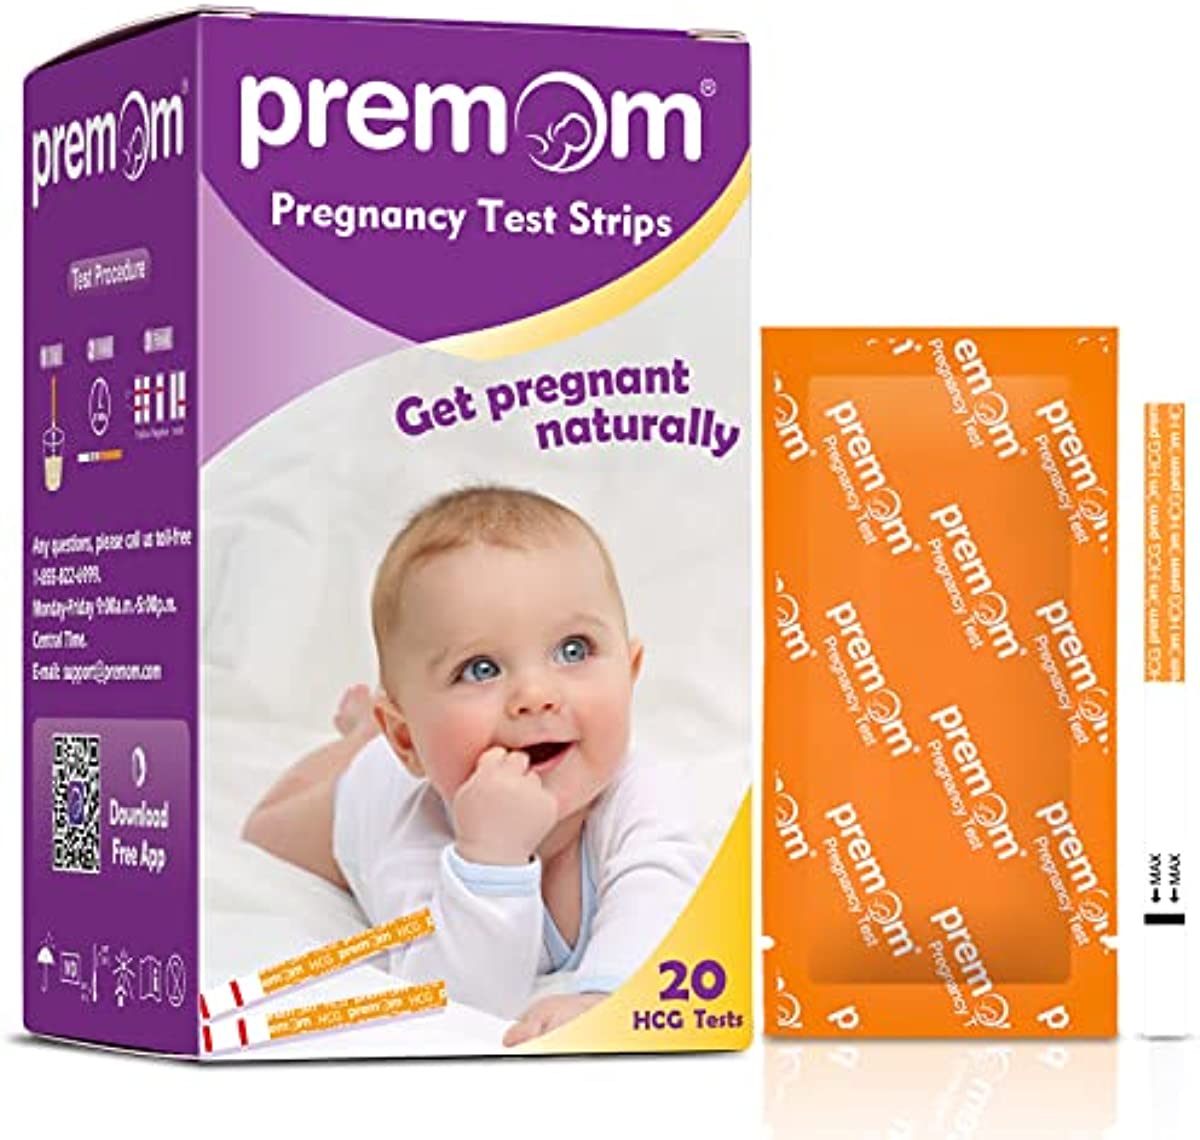 Premom Pregnancy Test Strips: Early Detection Pregnant Test Kits- 20 Pack